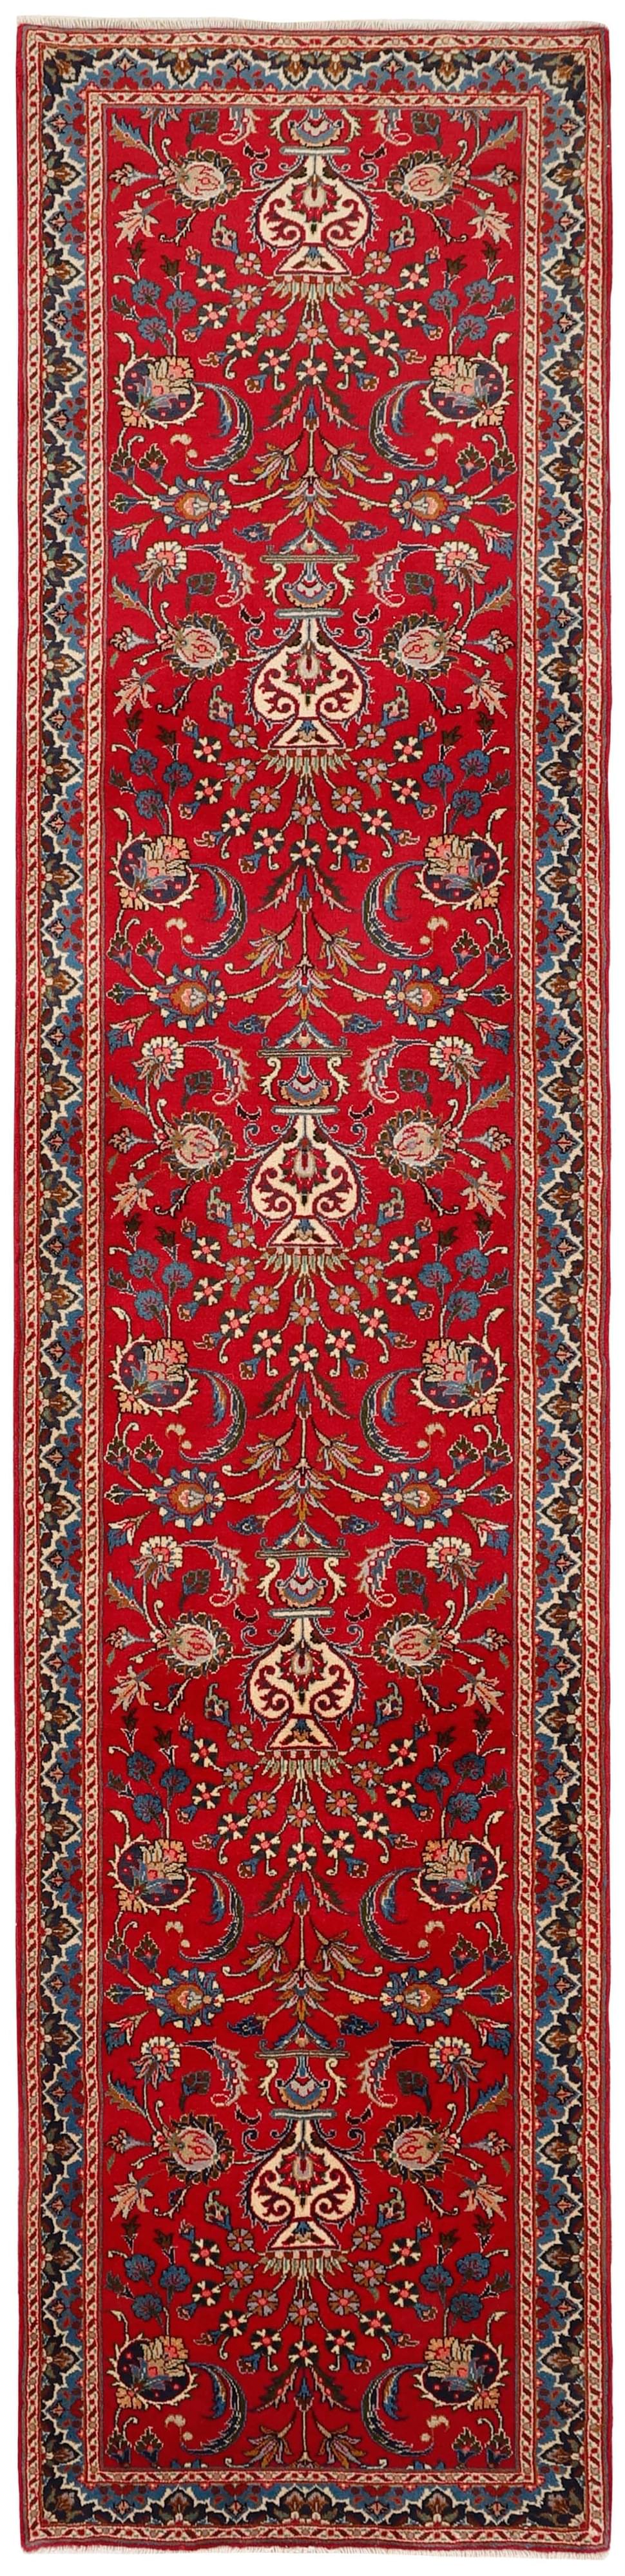 authentic persian runner with a traditional floral design in red